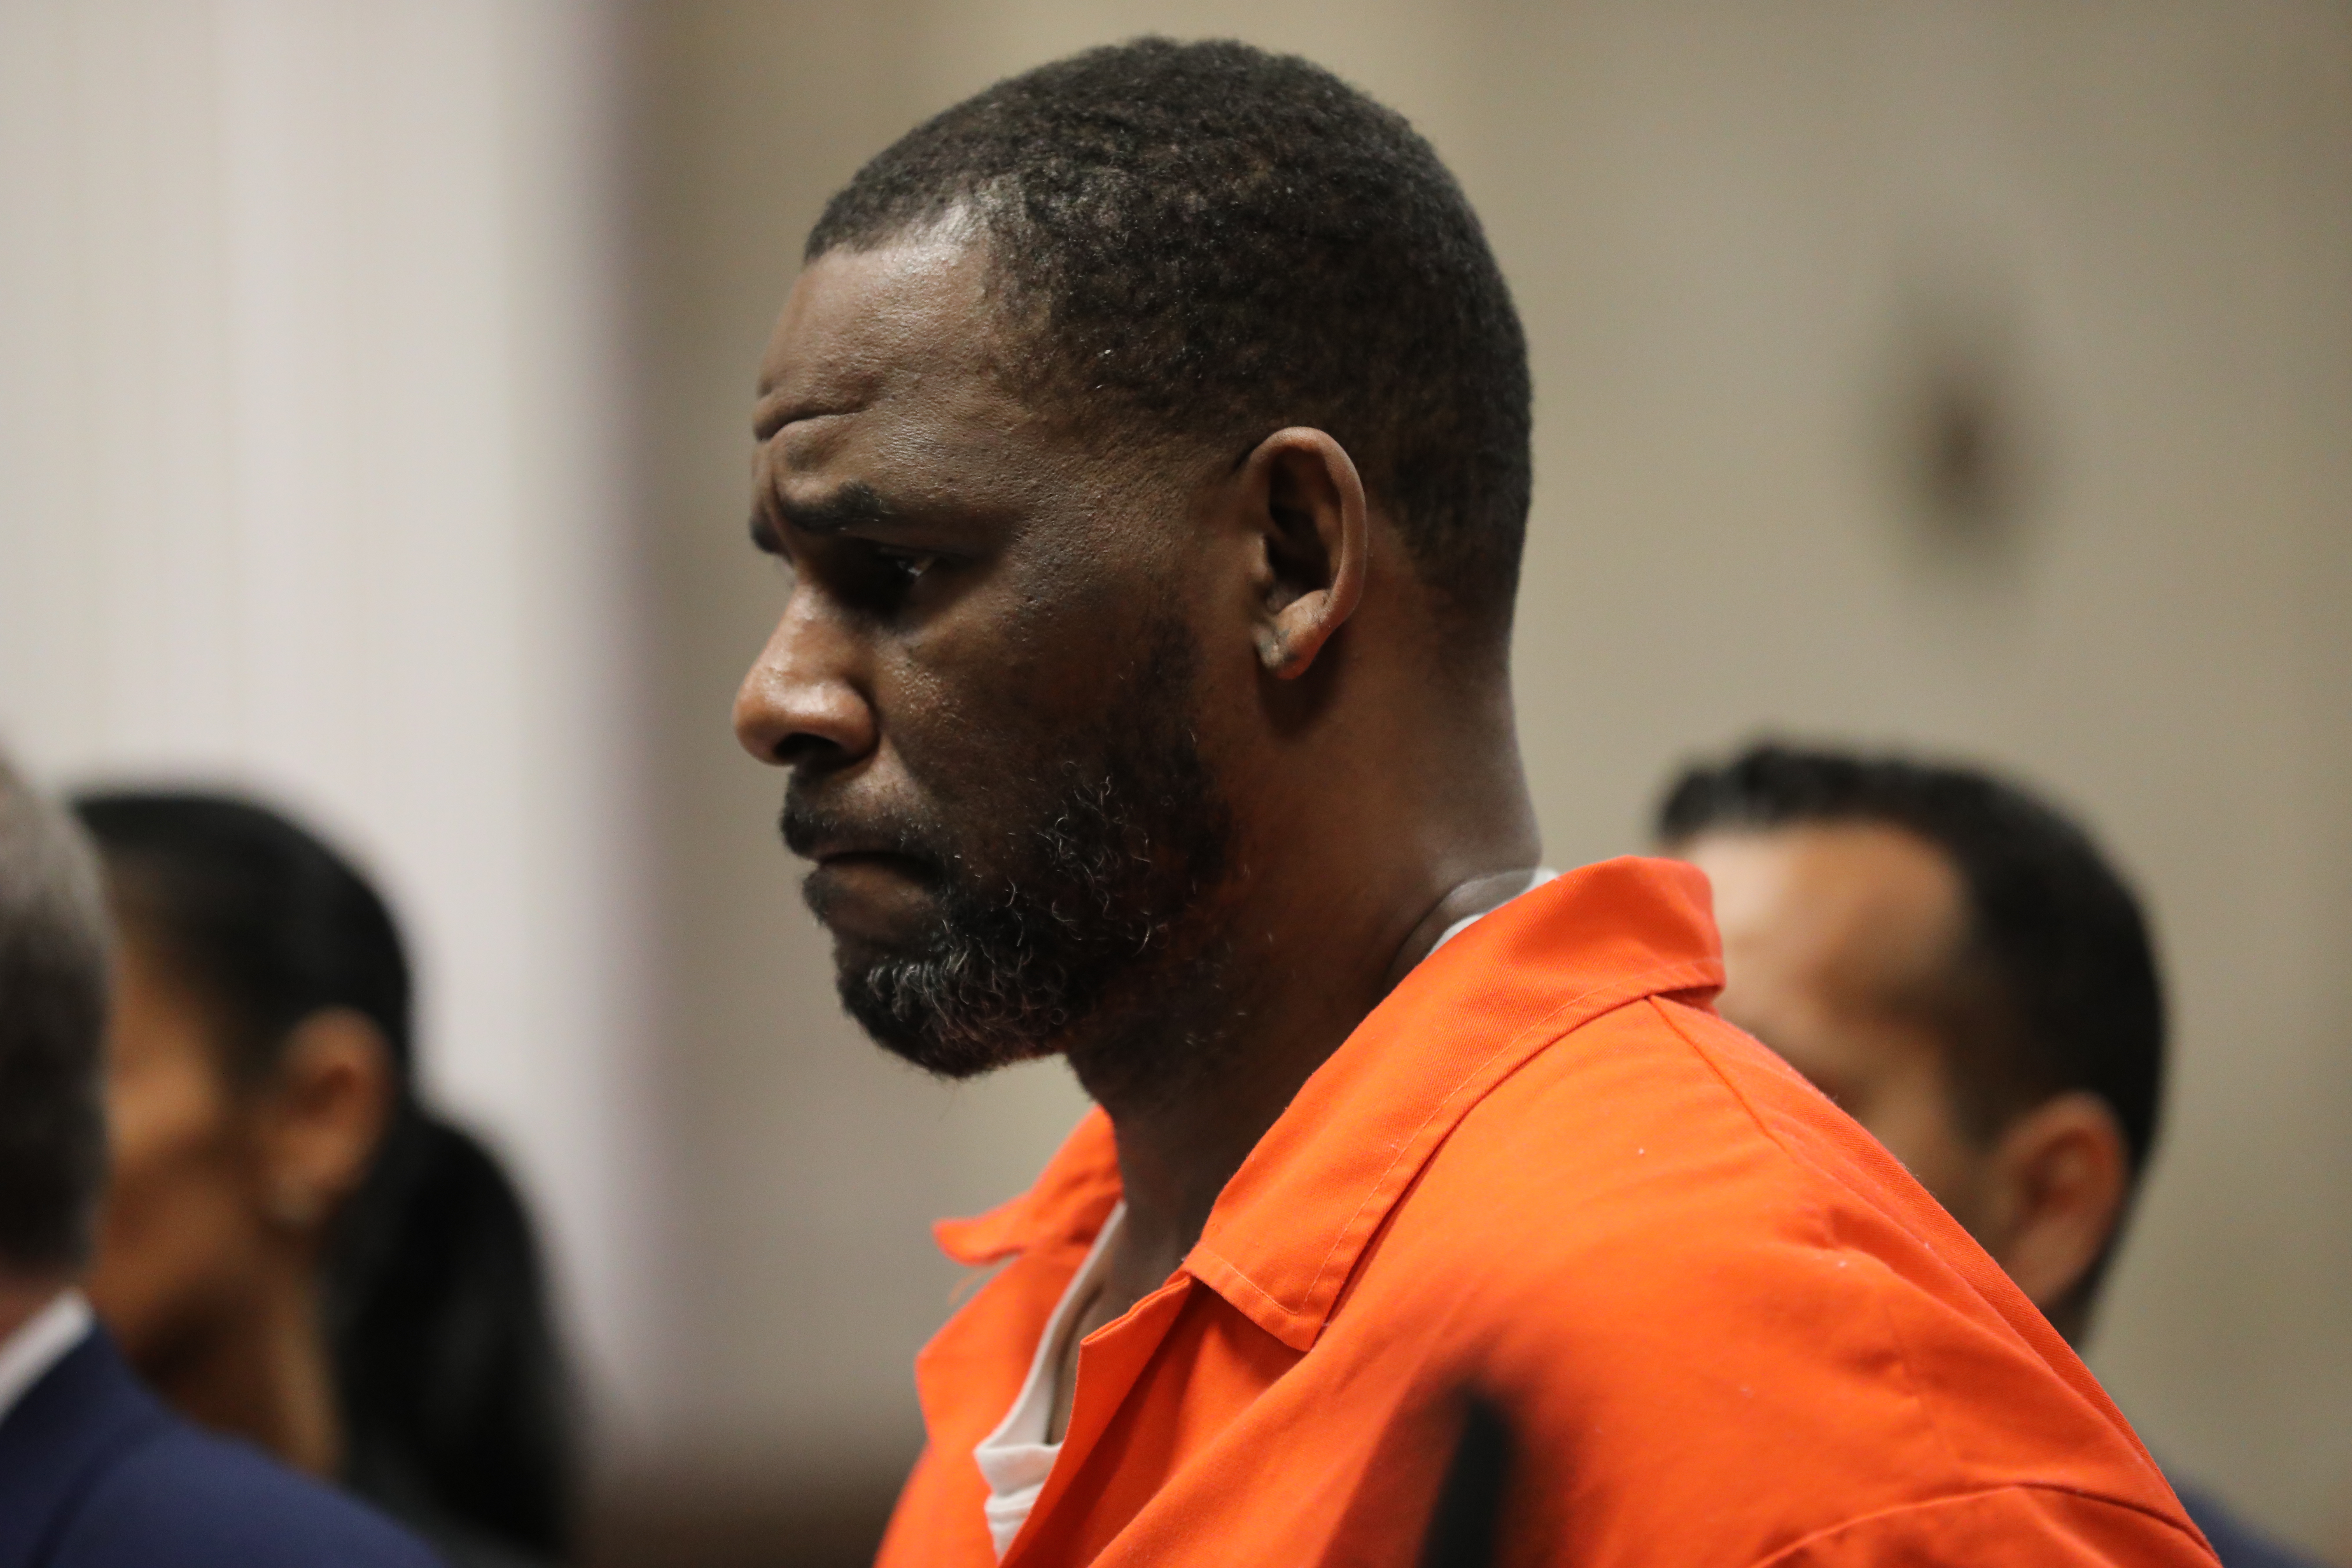 Singer R. Kelly appears during a hearing at the Leighton Criminal Courthouse on September 17, 2019 in Chicago, Illinois.